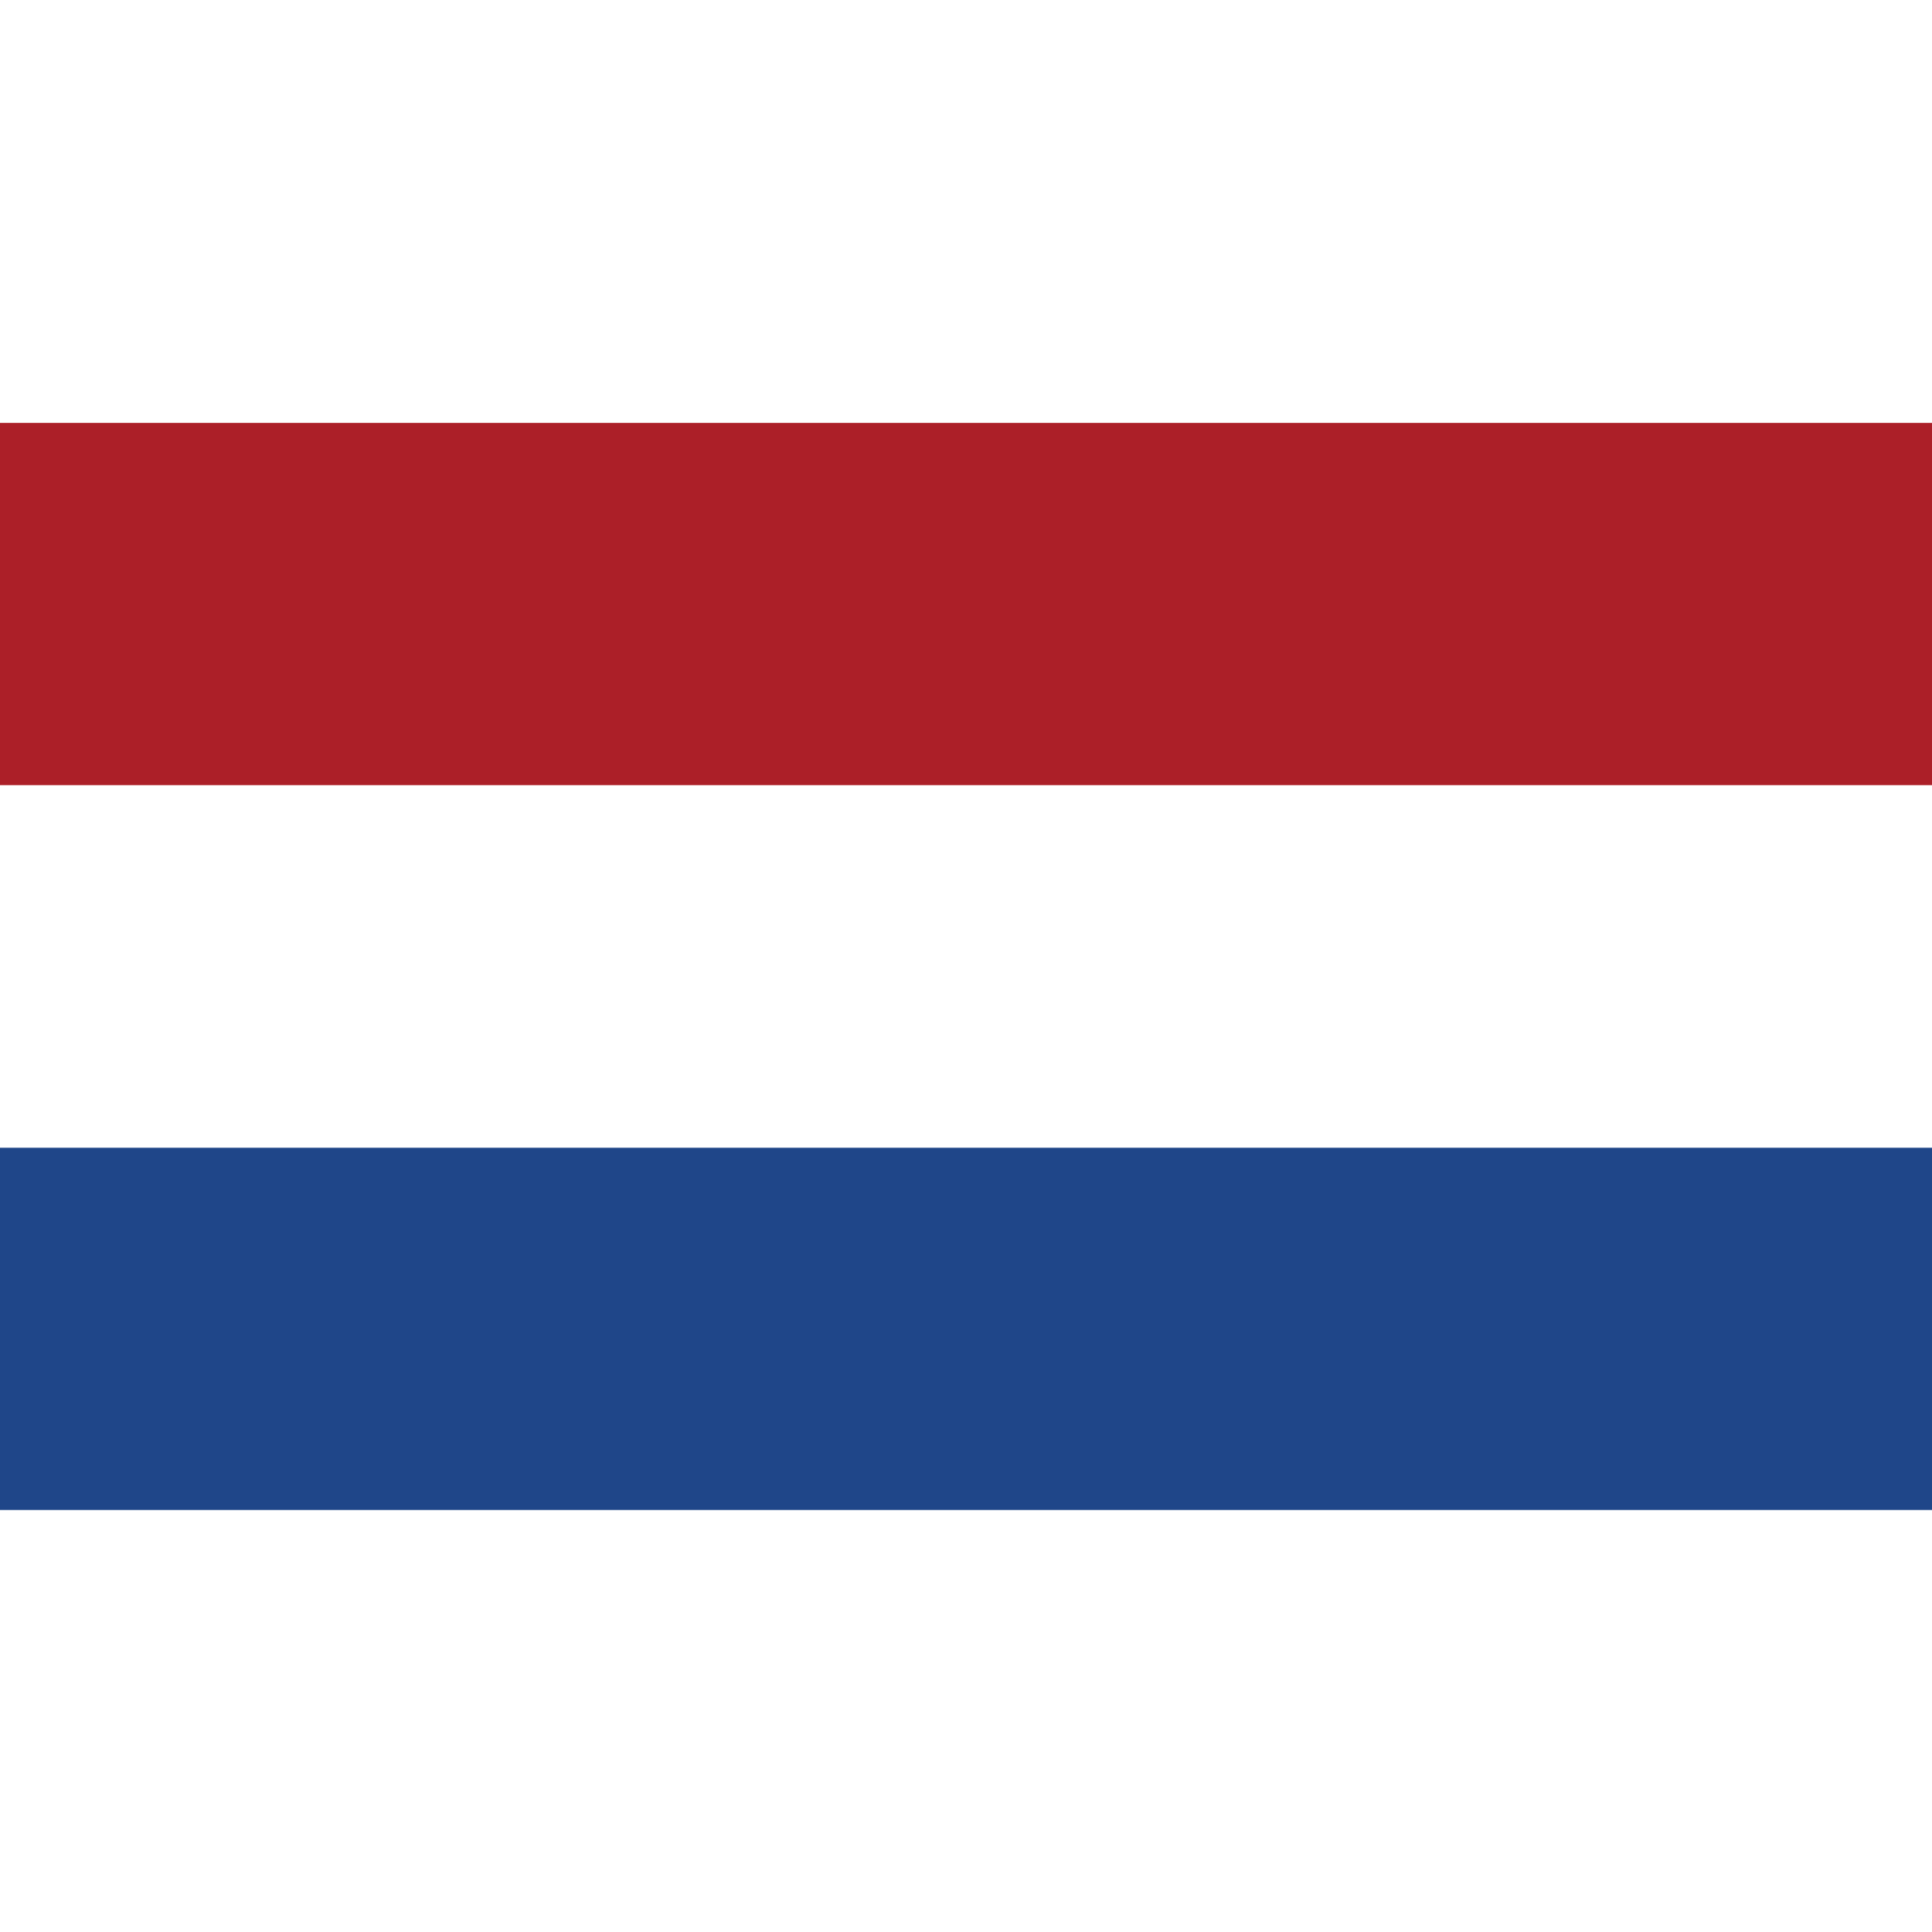 The Netherlands flag is made up of three equal horizontal bands in red, white, and blue. 